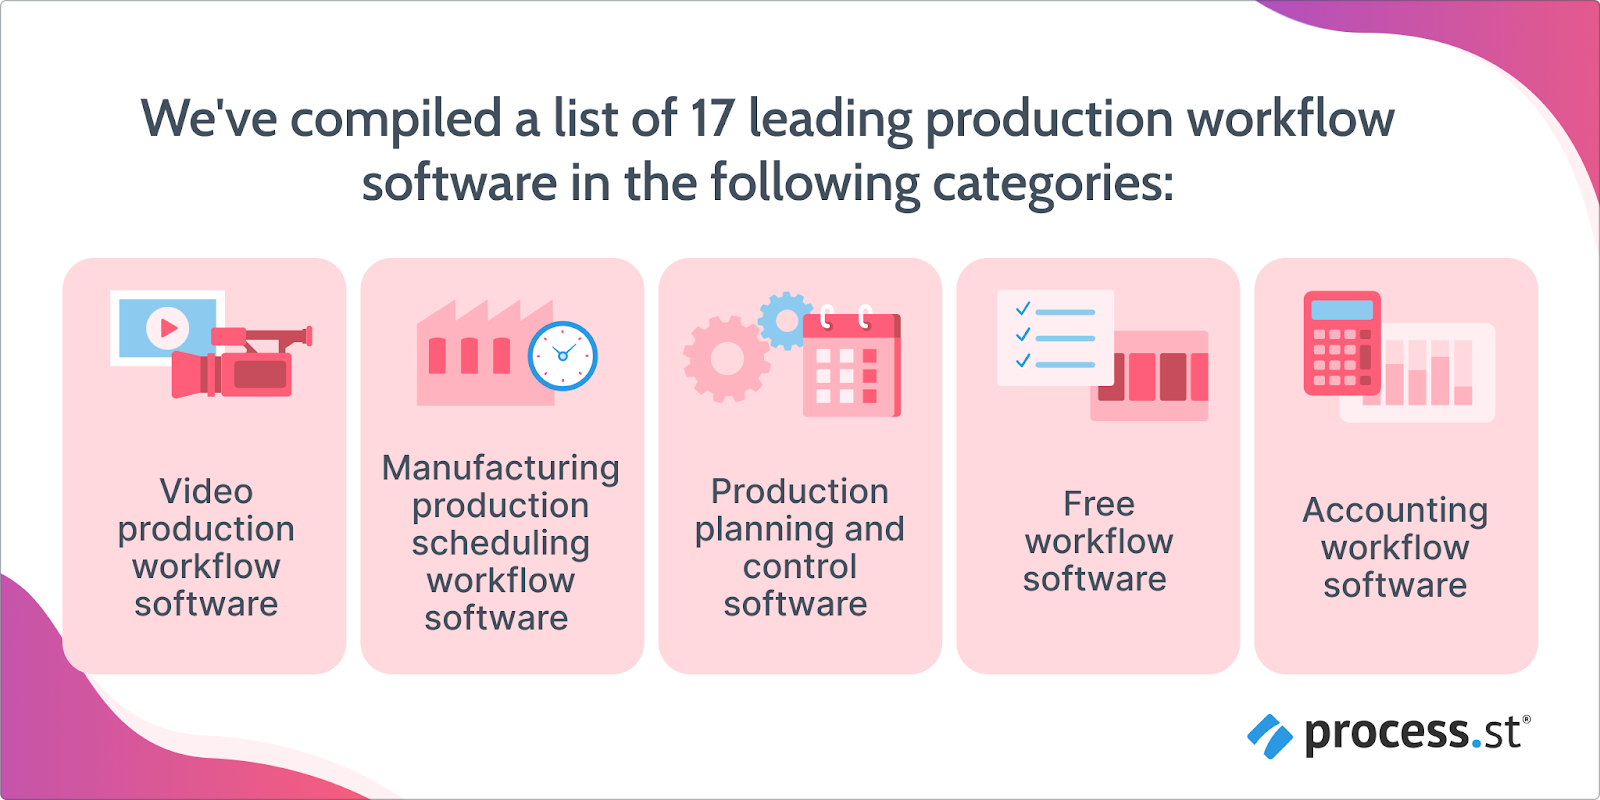 image showing the different categories of production workflow software